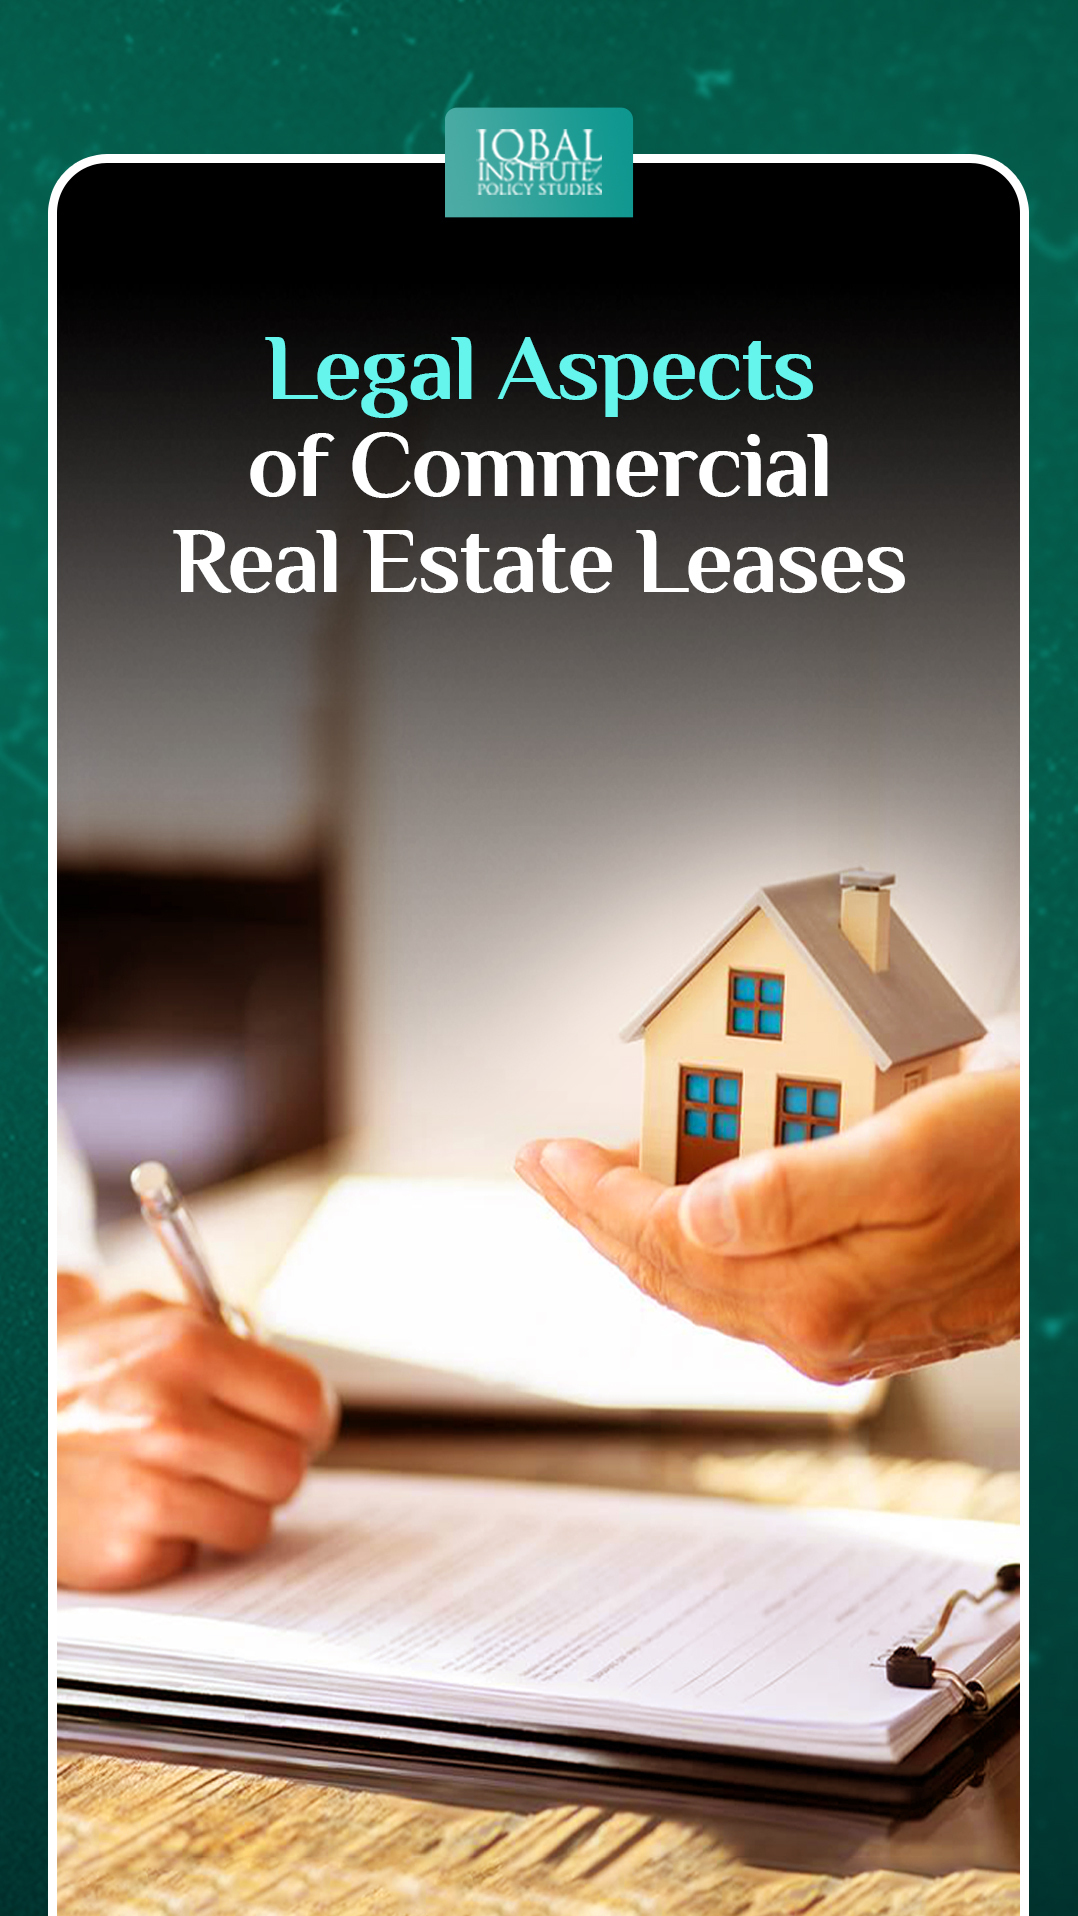 Legal Aspects of Commercial Real Estate Leases